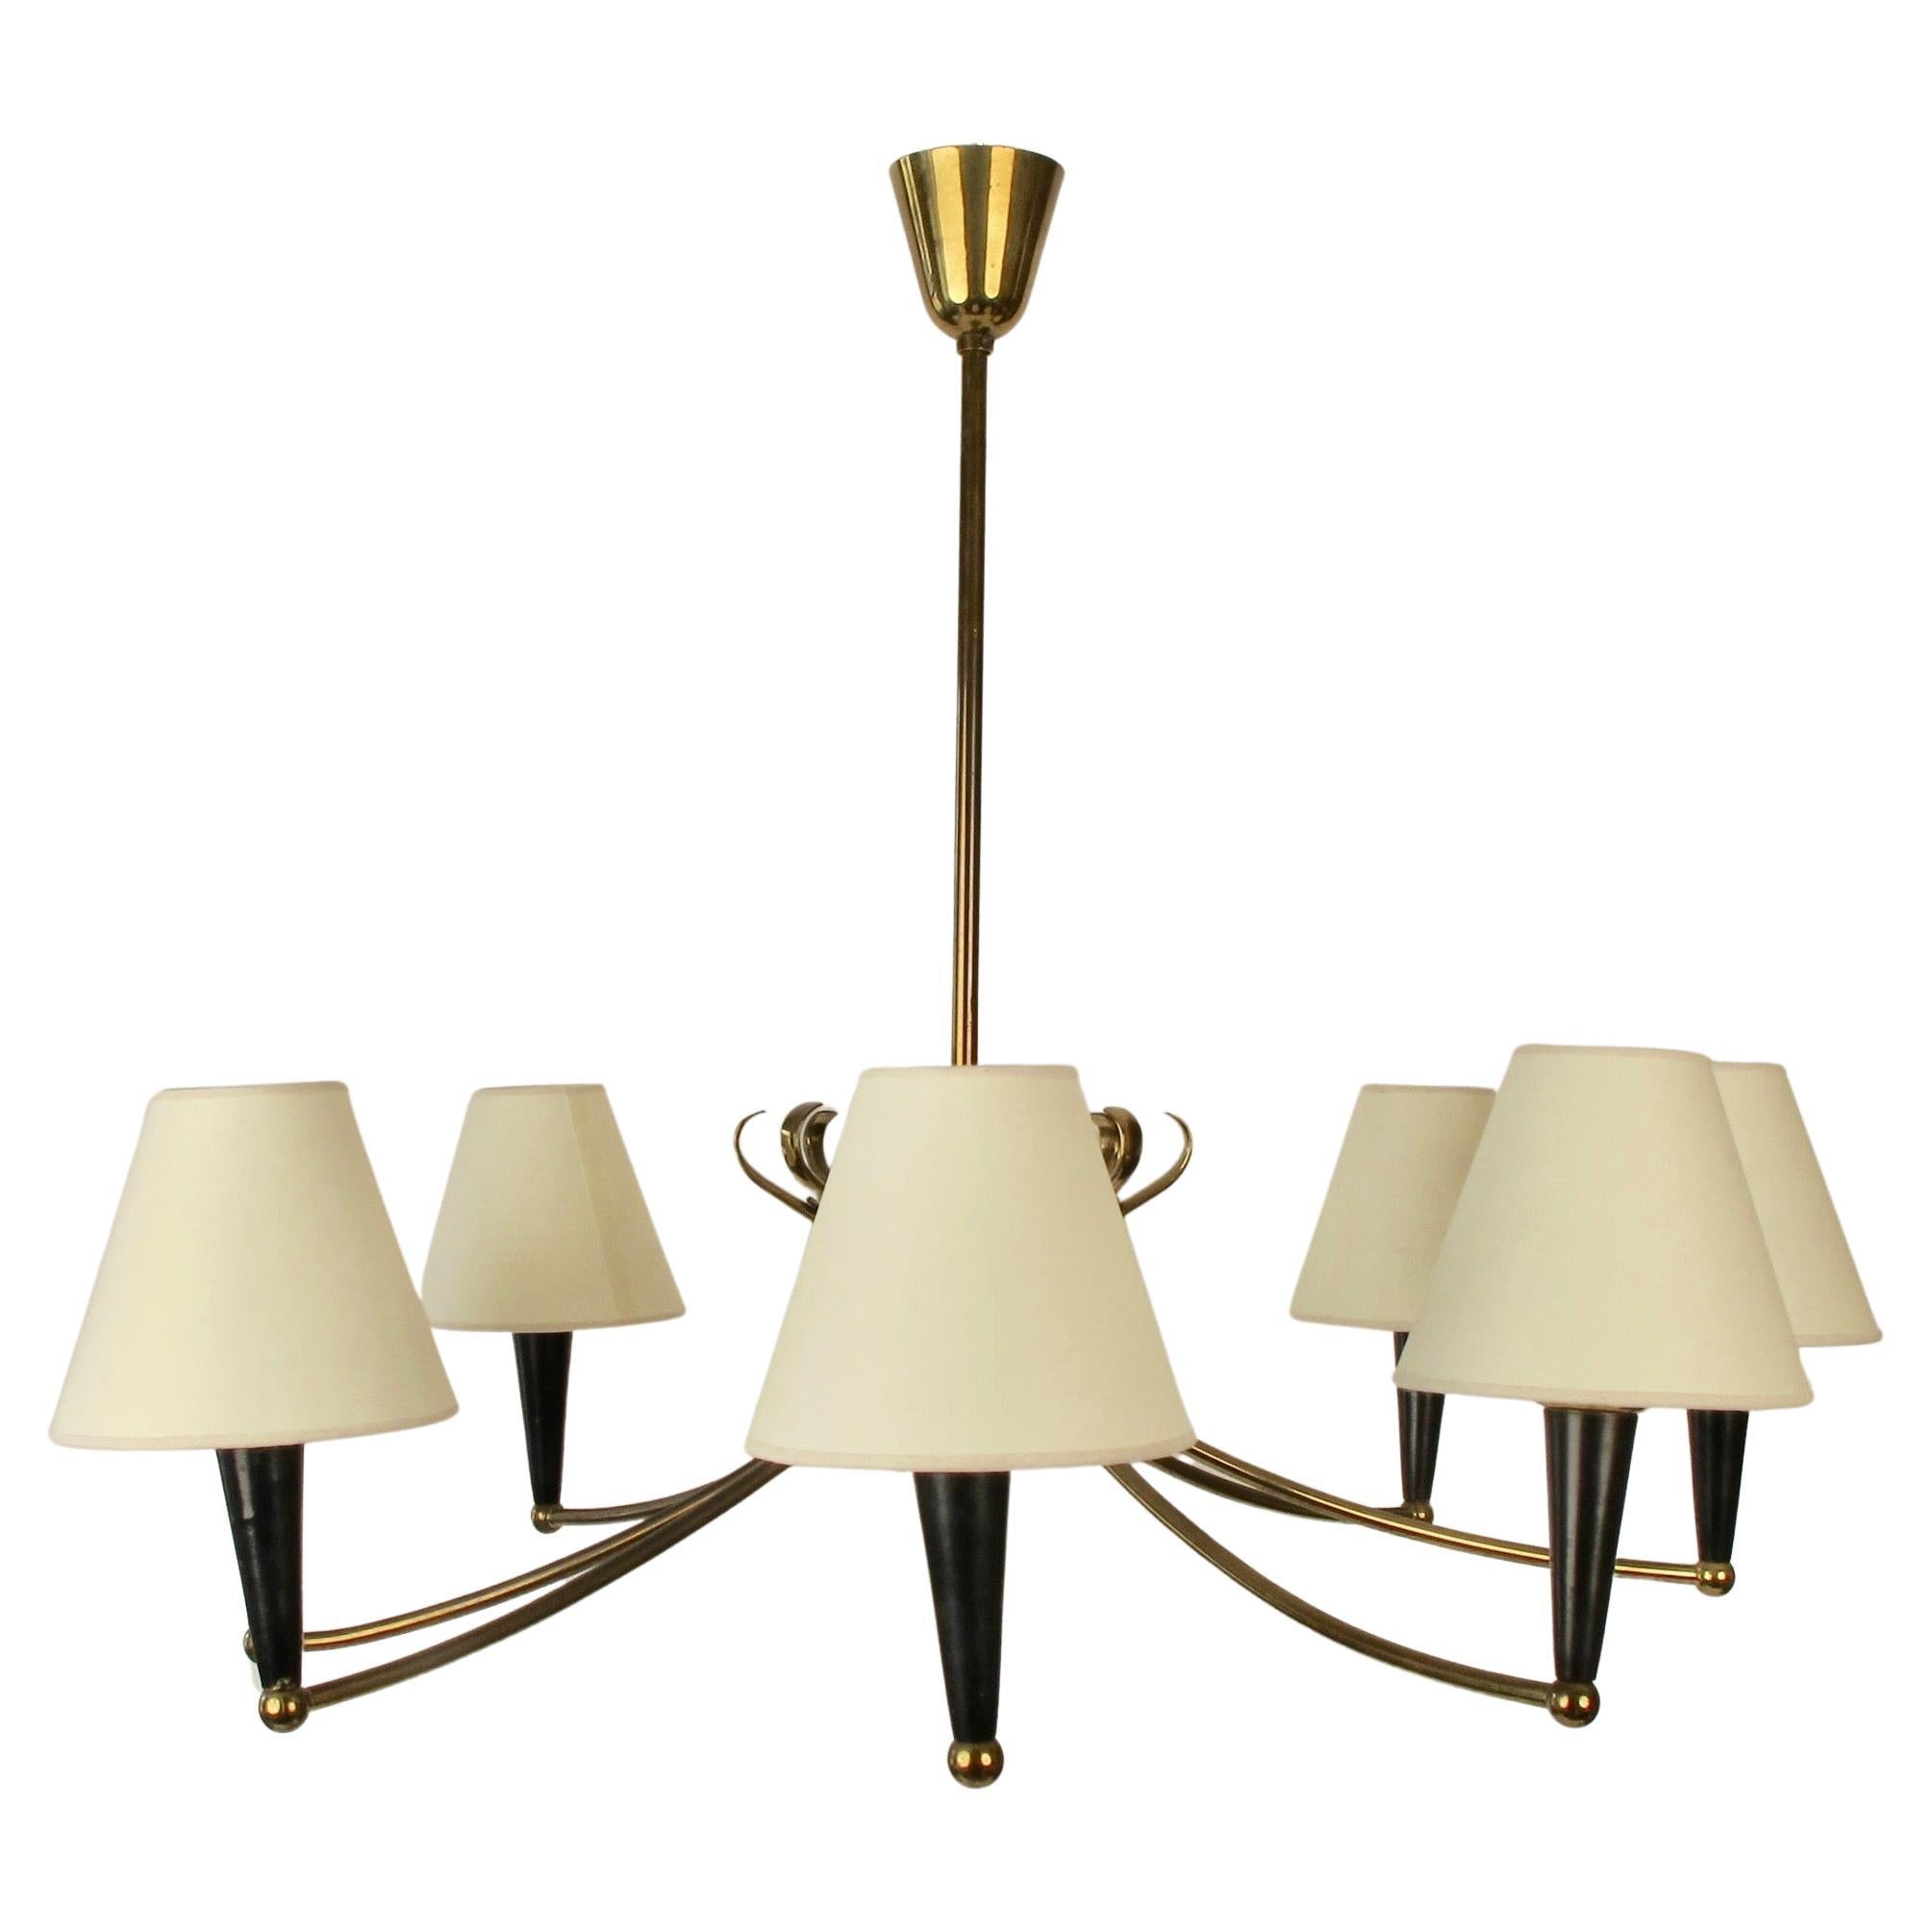 Modern Eight Arm Chandelier from Austria with Parchment Shades, 1950's For Sale